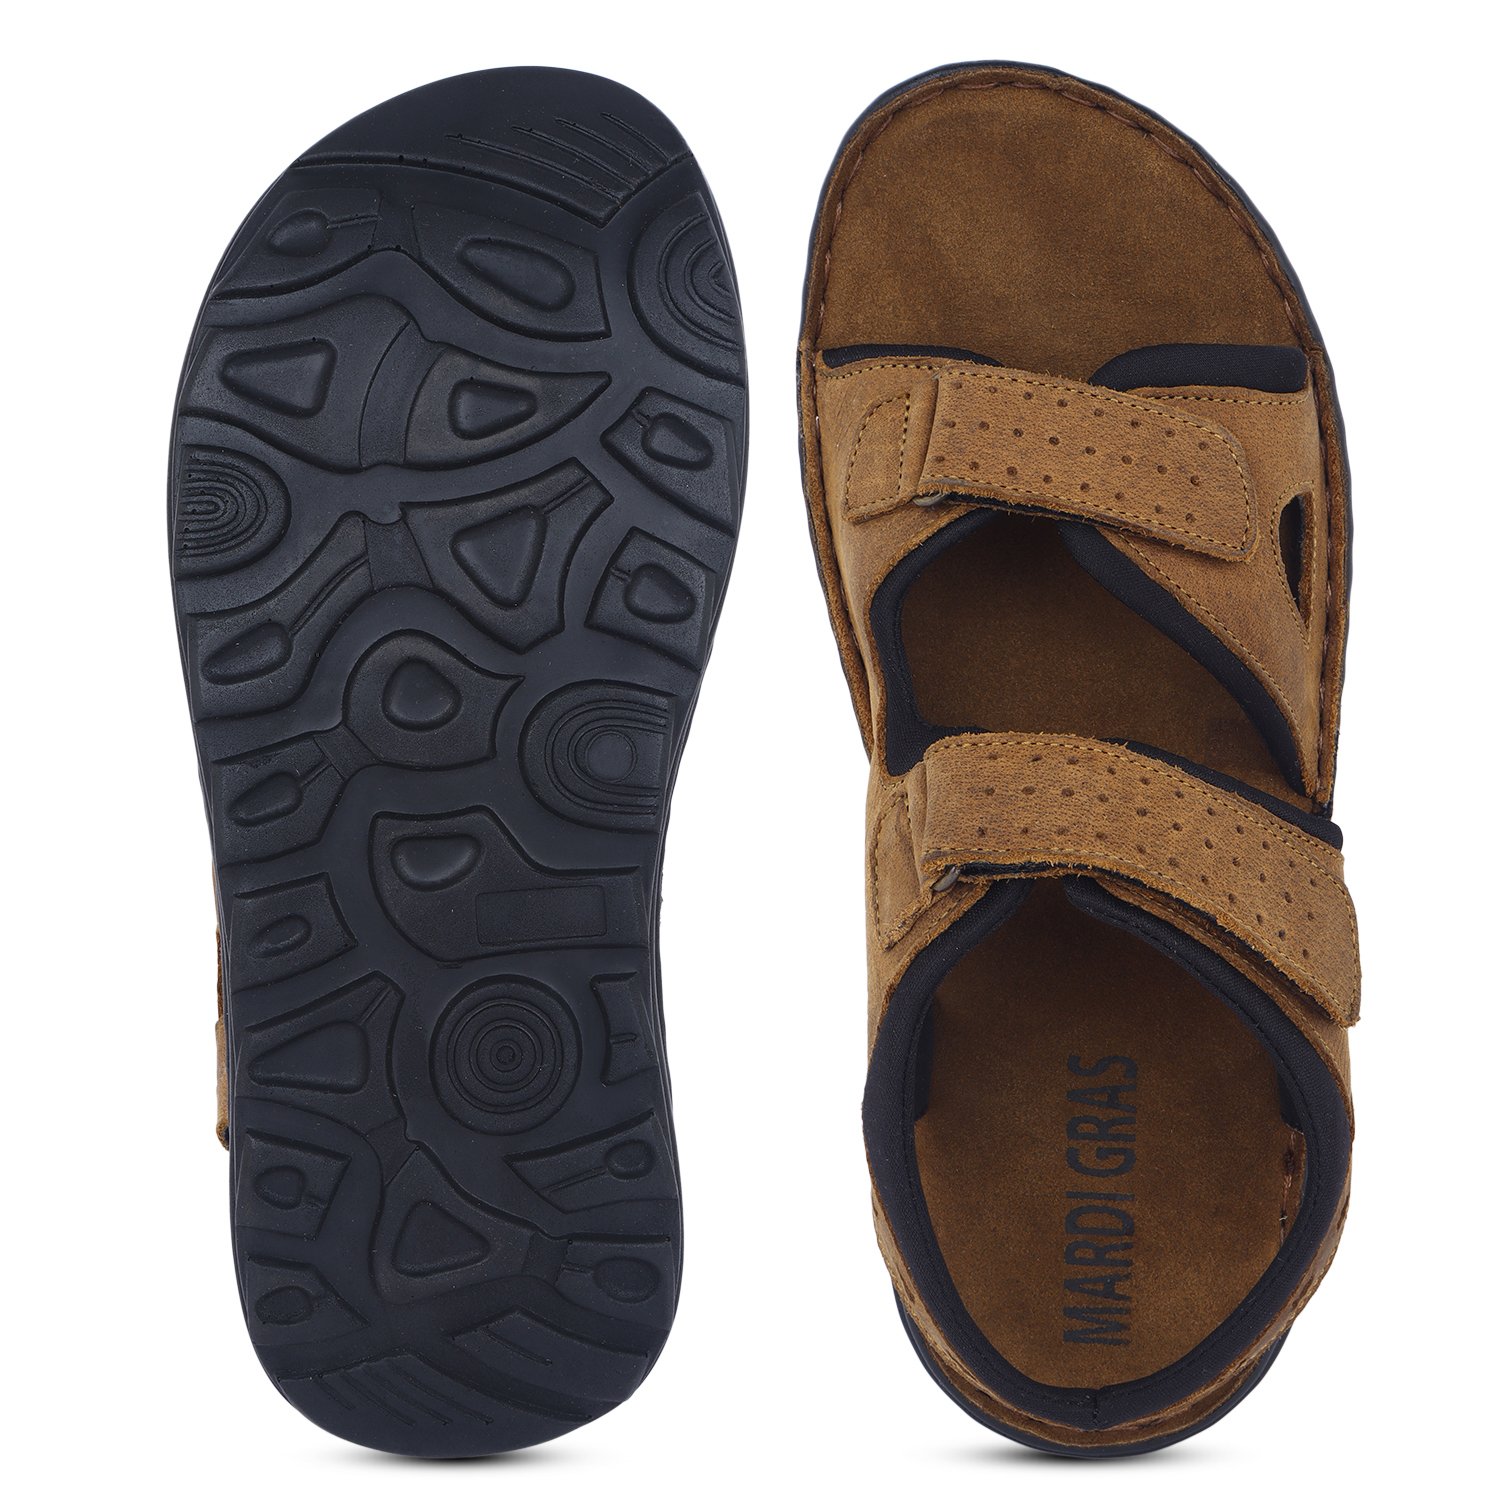 Brown Leather sandals With Double strap closure for Men - Mardi Gras